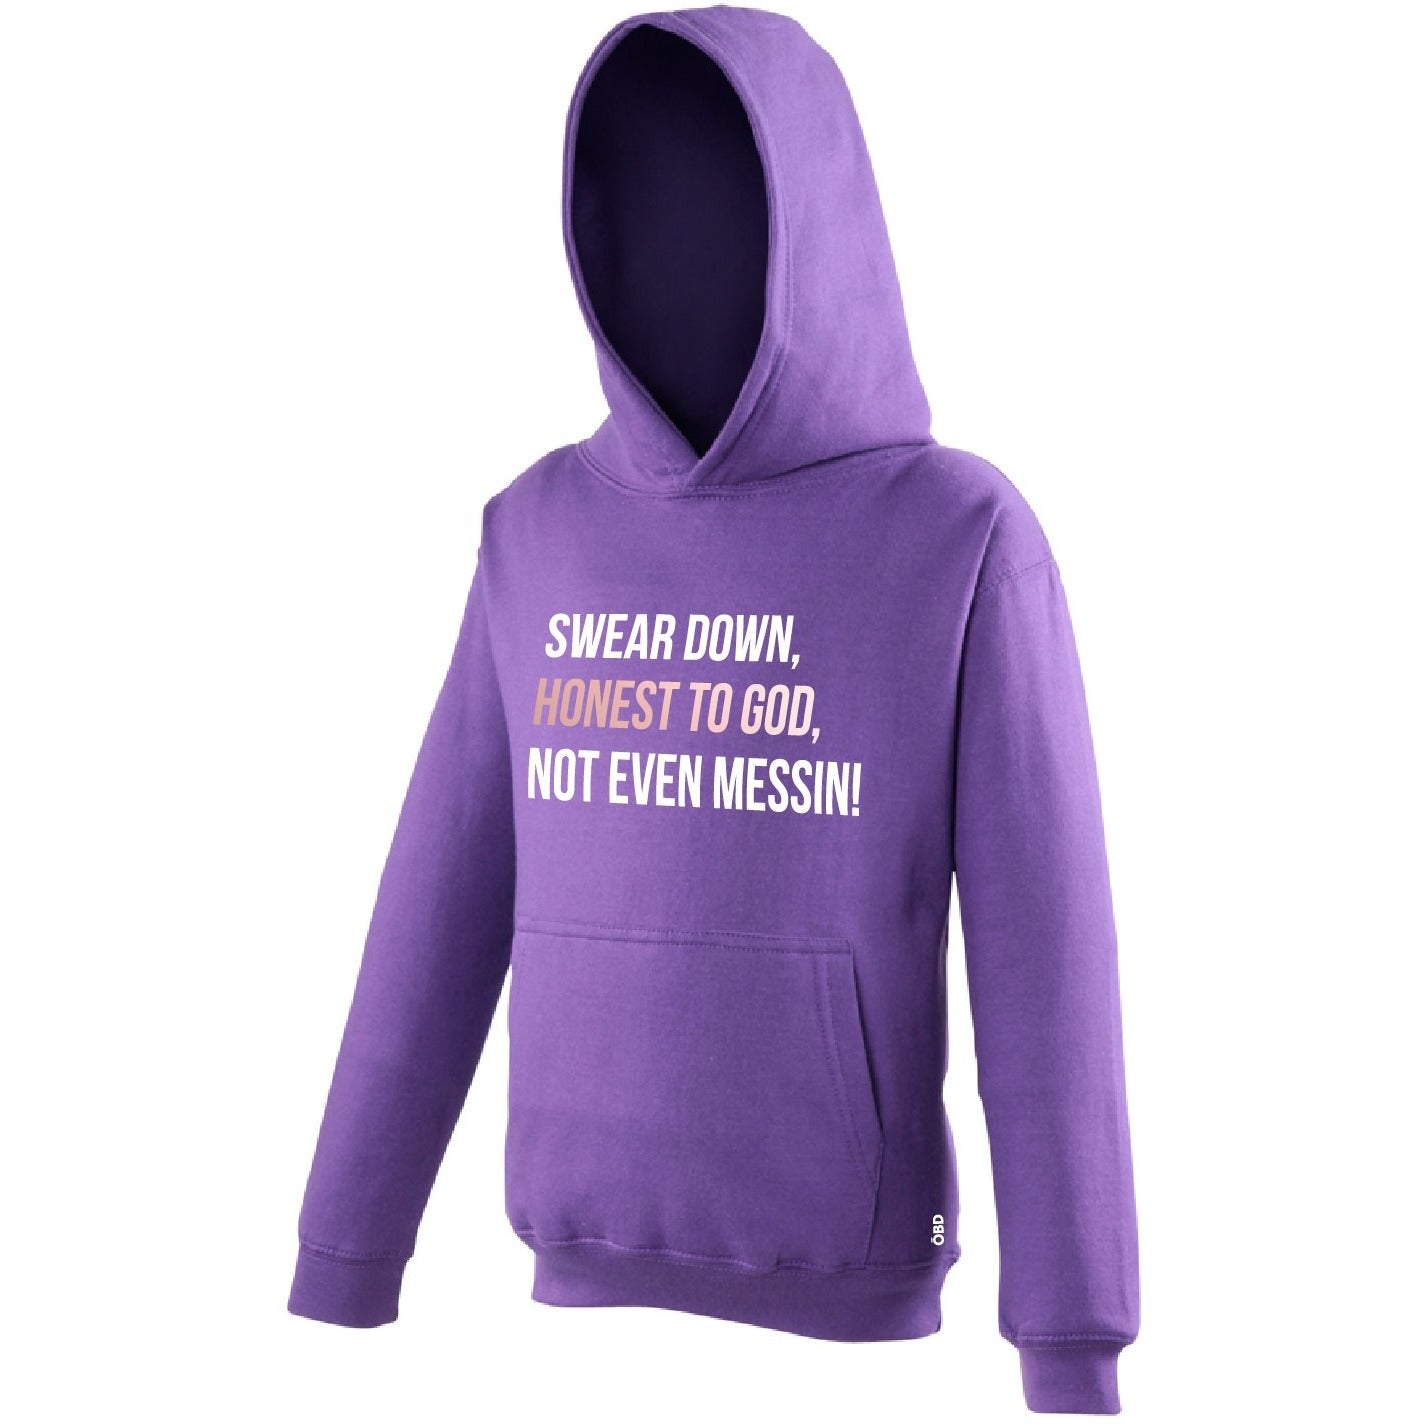 Scouse bird problems, Scouse bird blogs, Scouse bird probs, swear down, hoody, hoodie, kids, clothing, clothes, for girls, girlie, alternative, gifts, gifting, pink, grey, purple, 